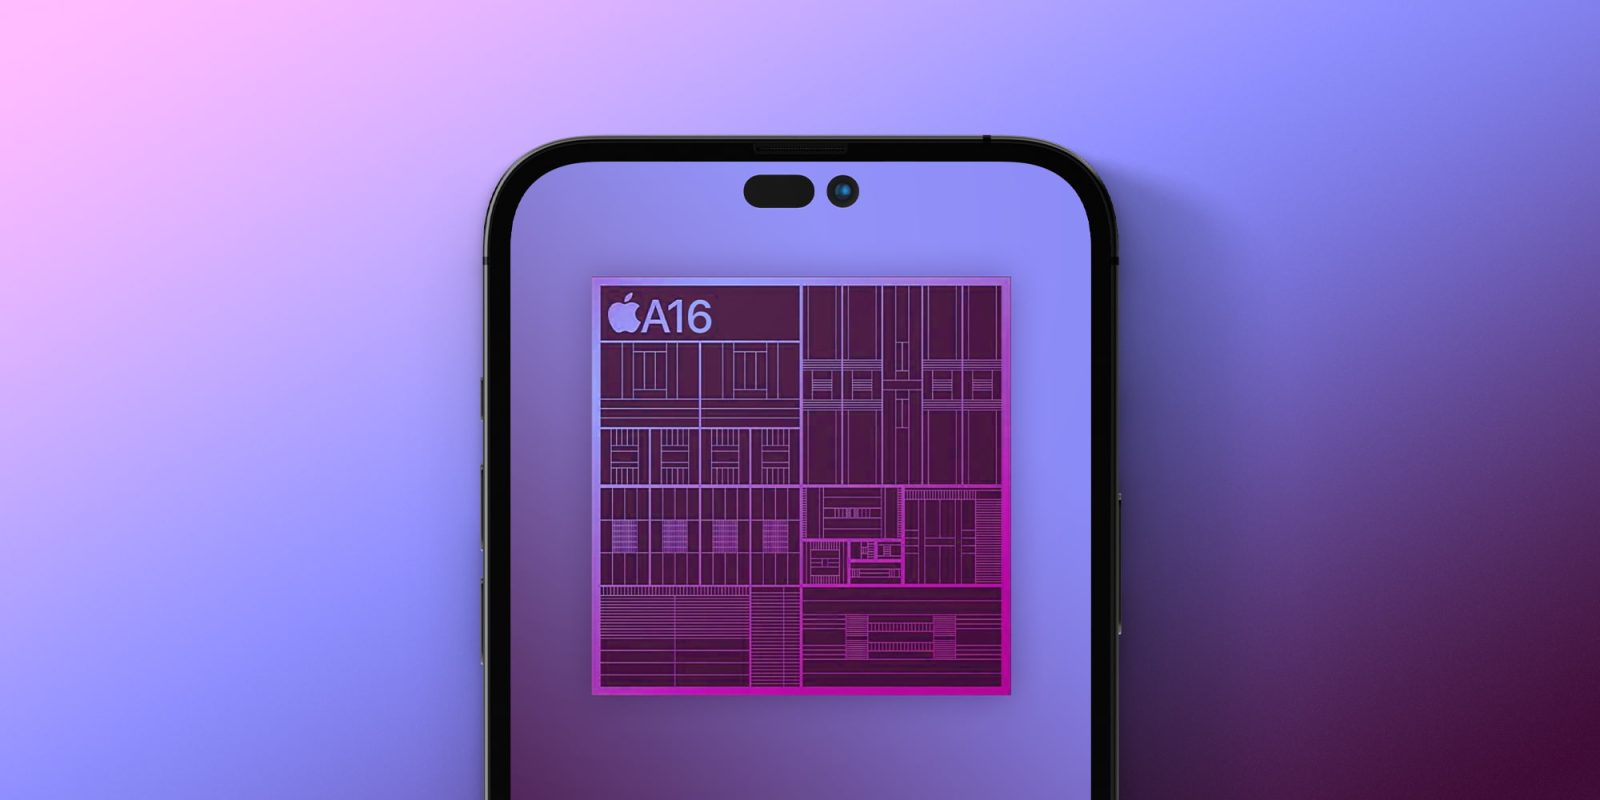 iPhone 14 Pro concept image with an A16 processor